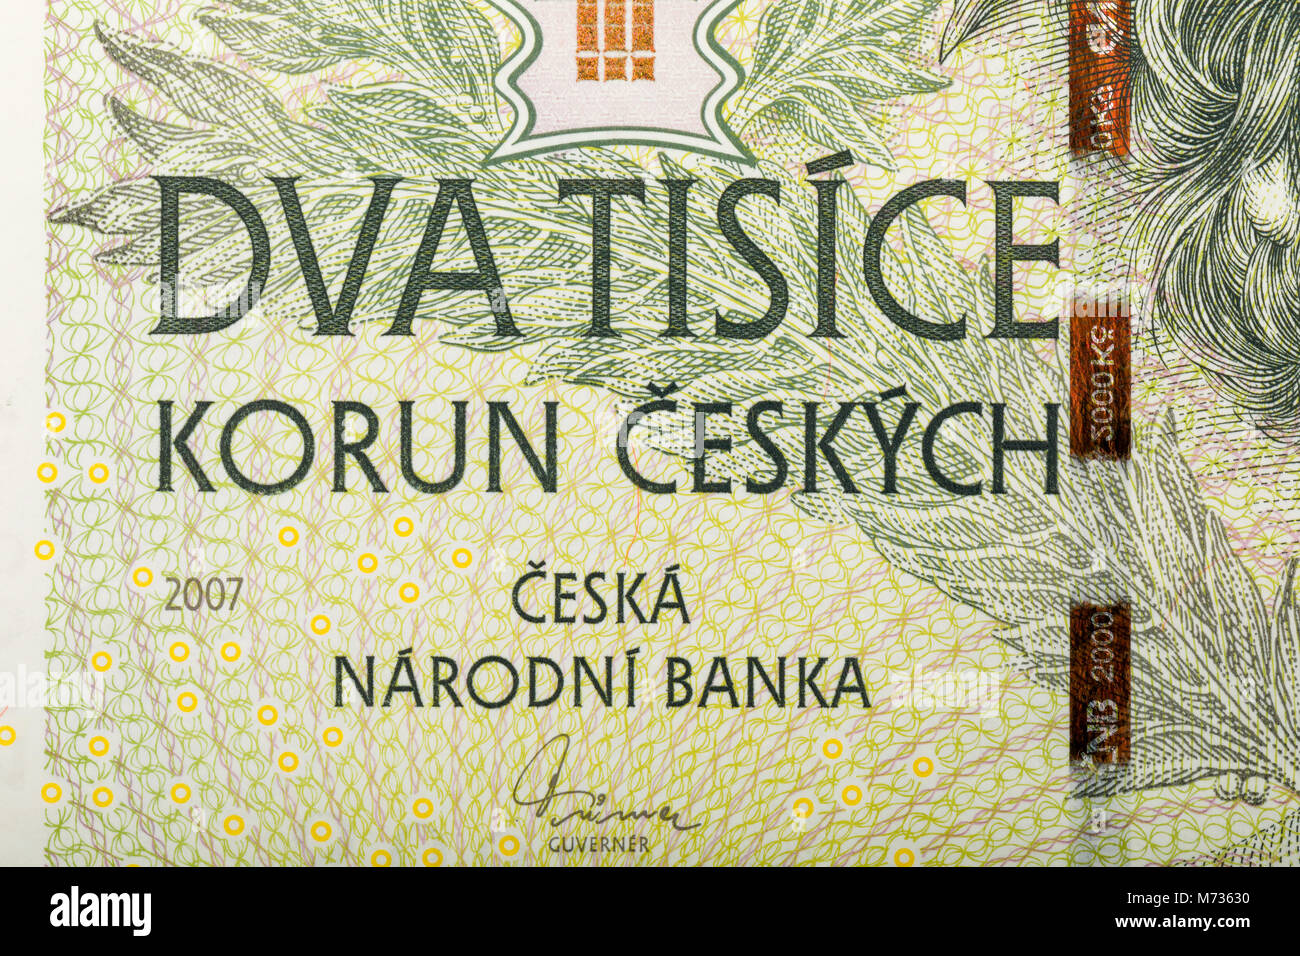 detail of czech banknote nominal value two thousand crowns, money business banking concept Stock Photo